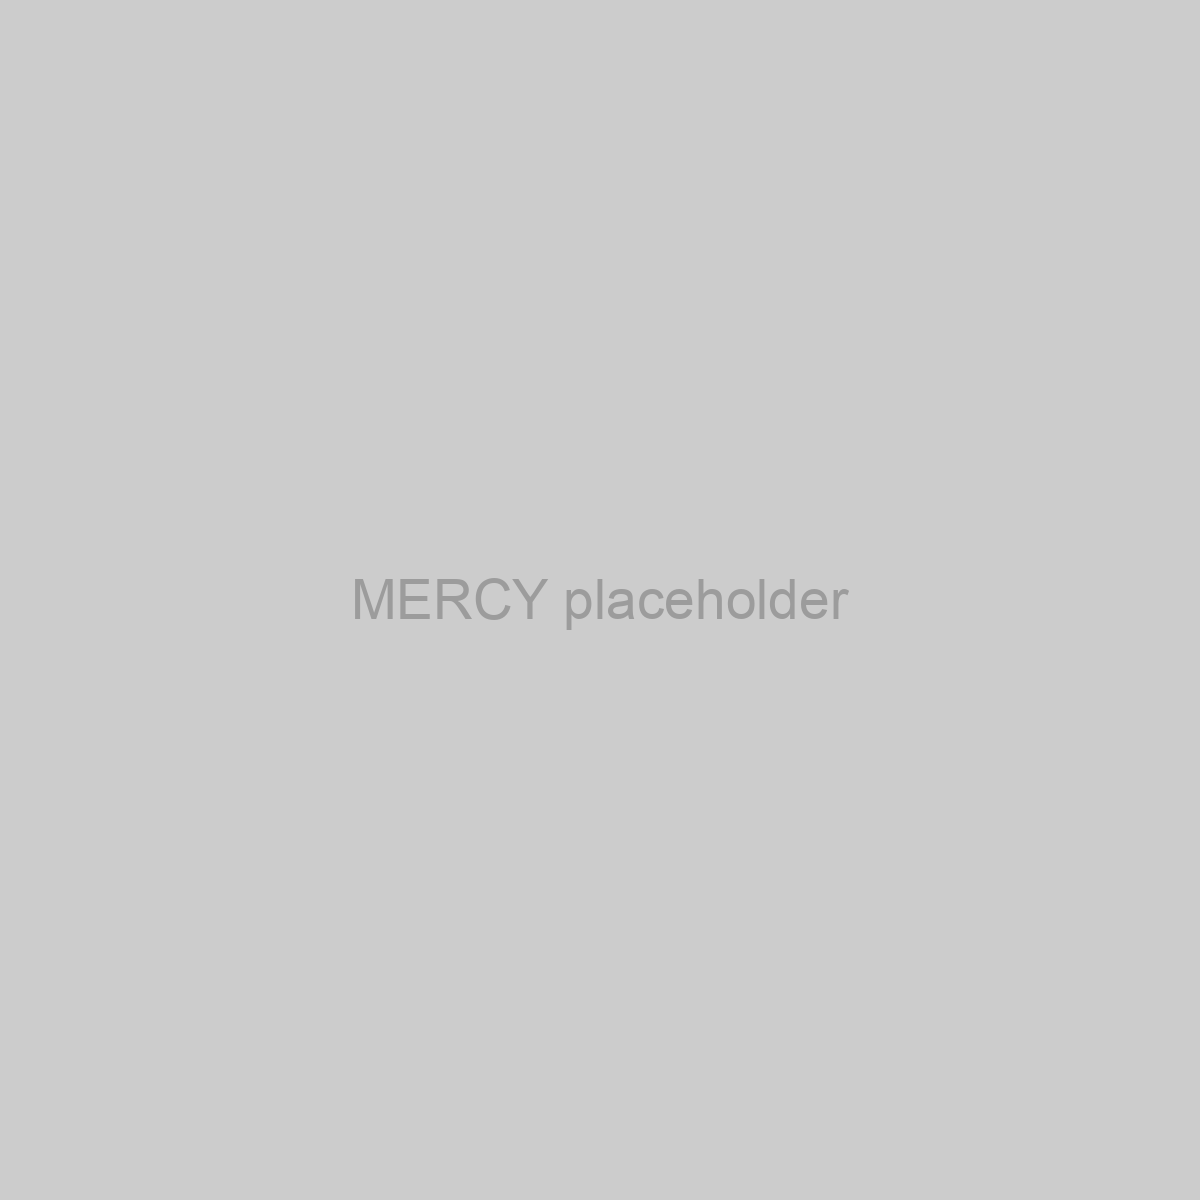 MERCY Placeholder Image